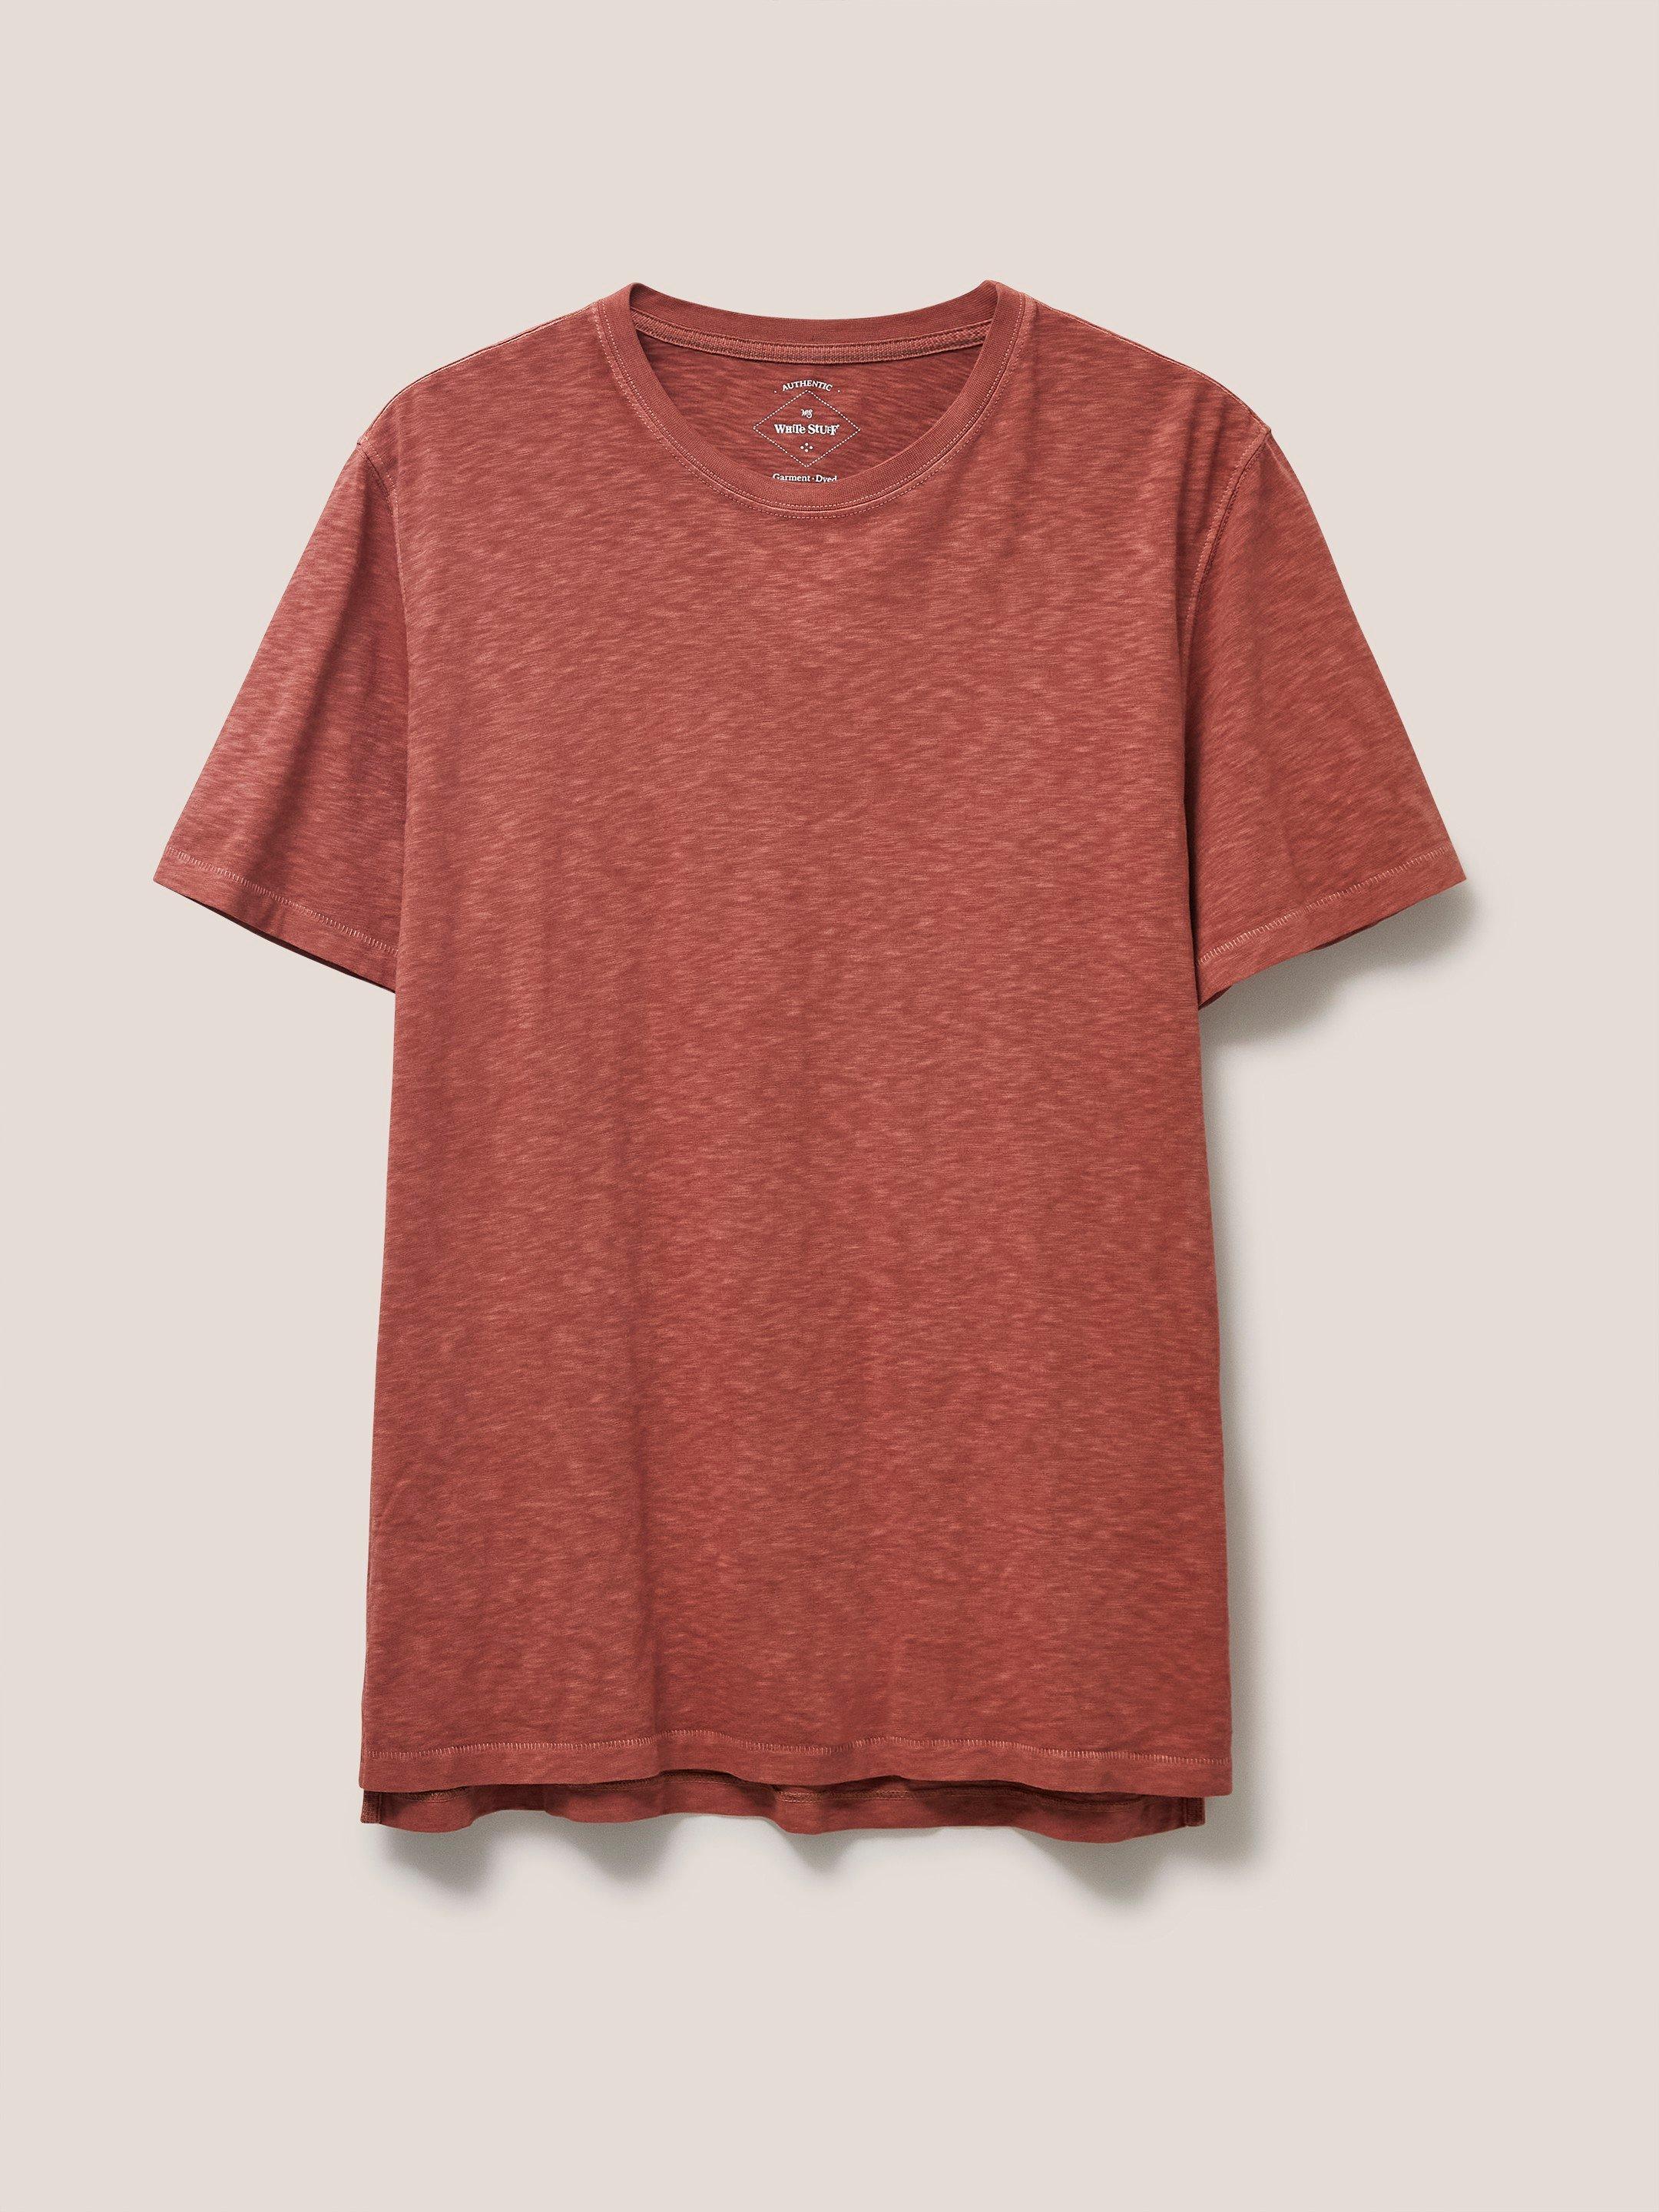 Abersoch Short Sleeve Tee in MID RED - FLAT FRONT